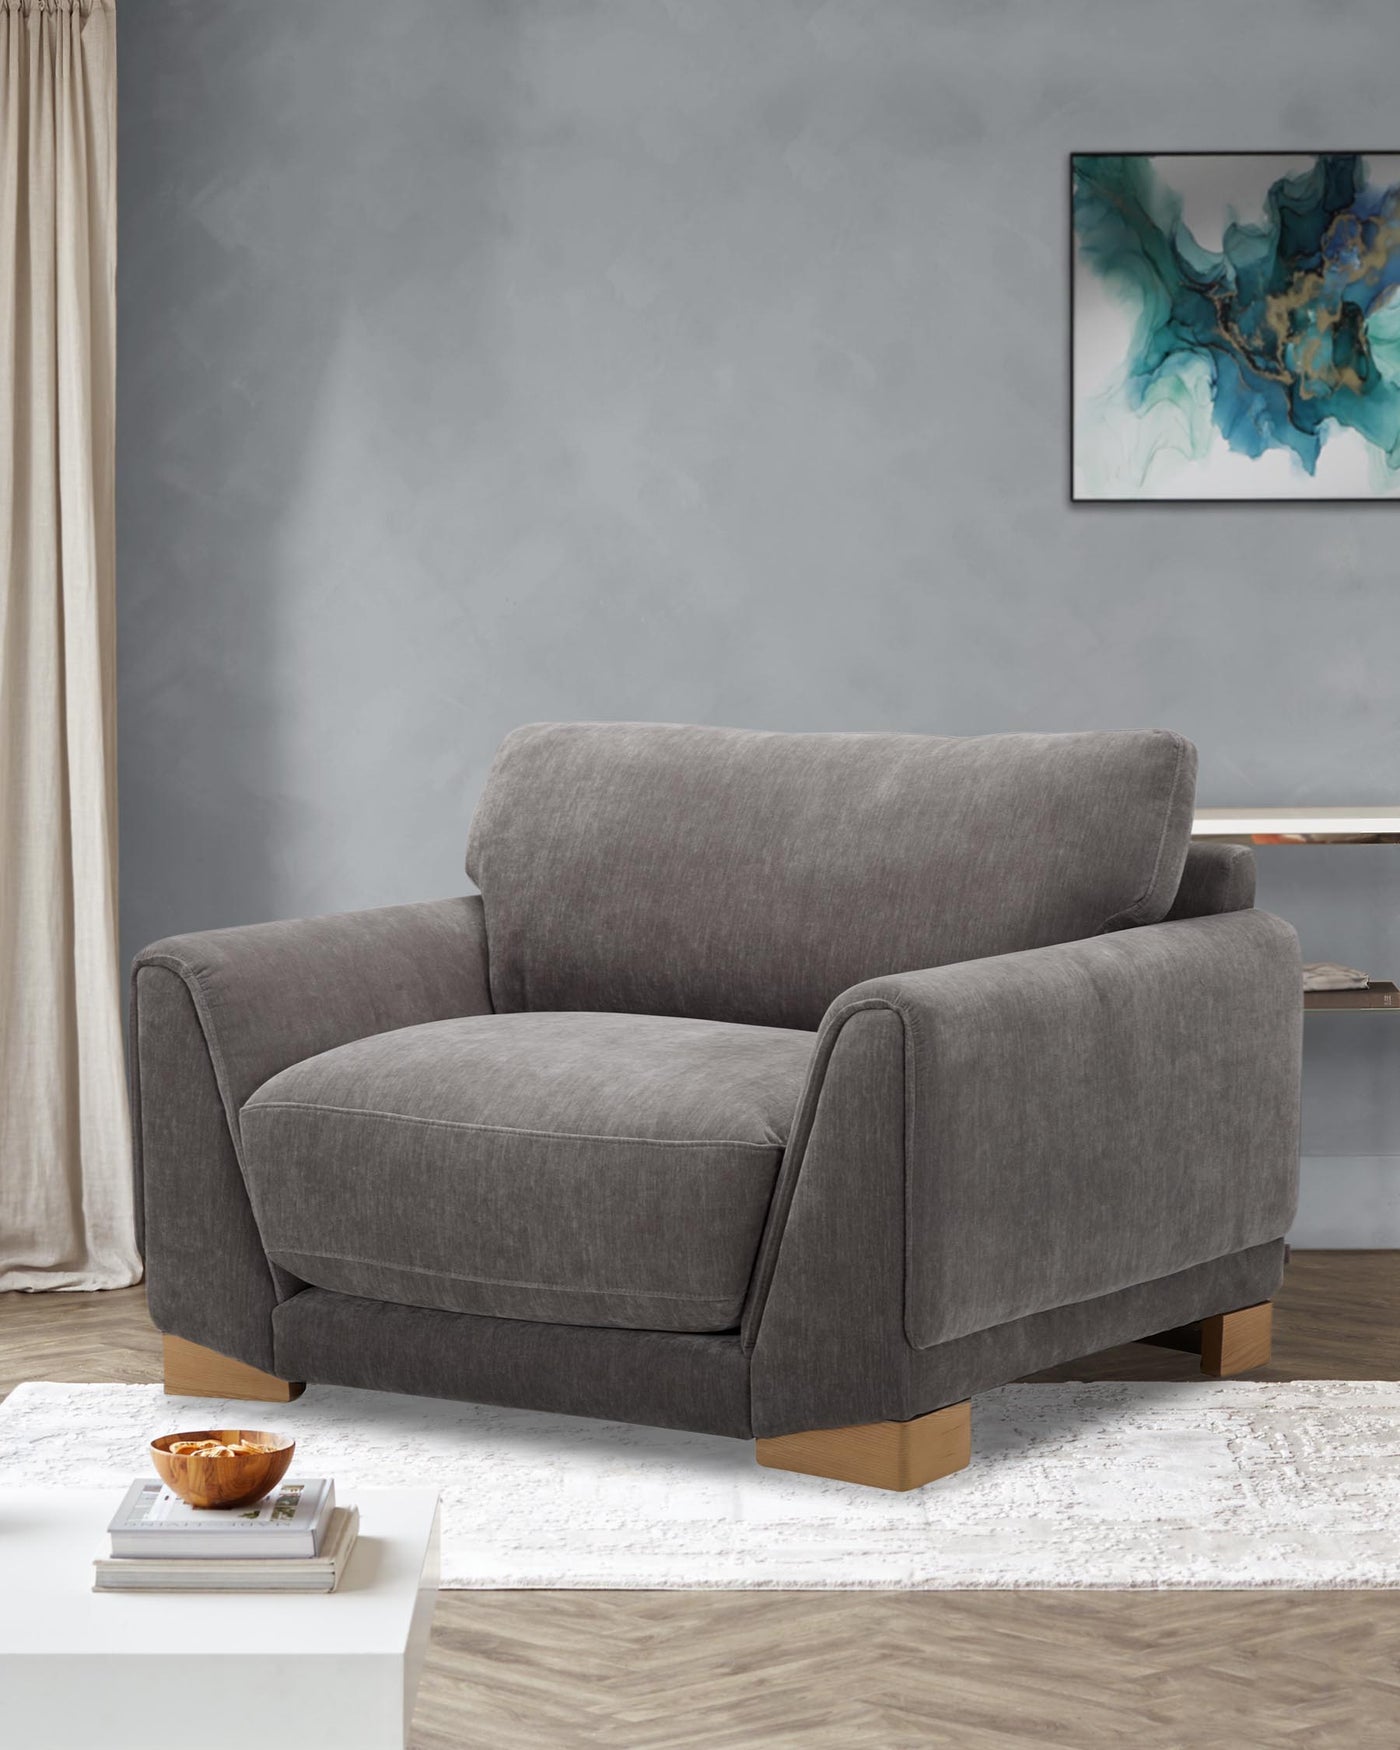 Saige mid grey fabric armchair with natural wood legs